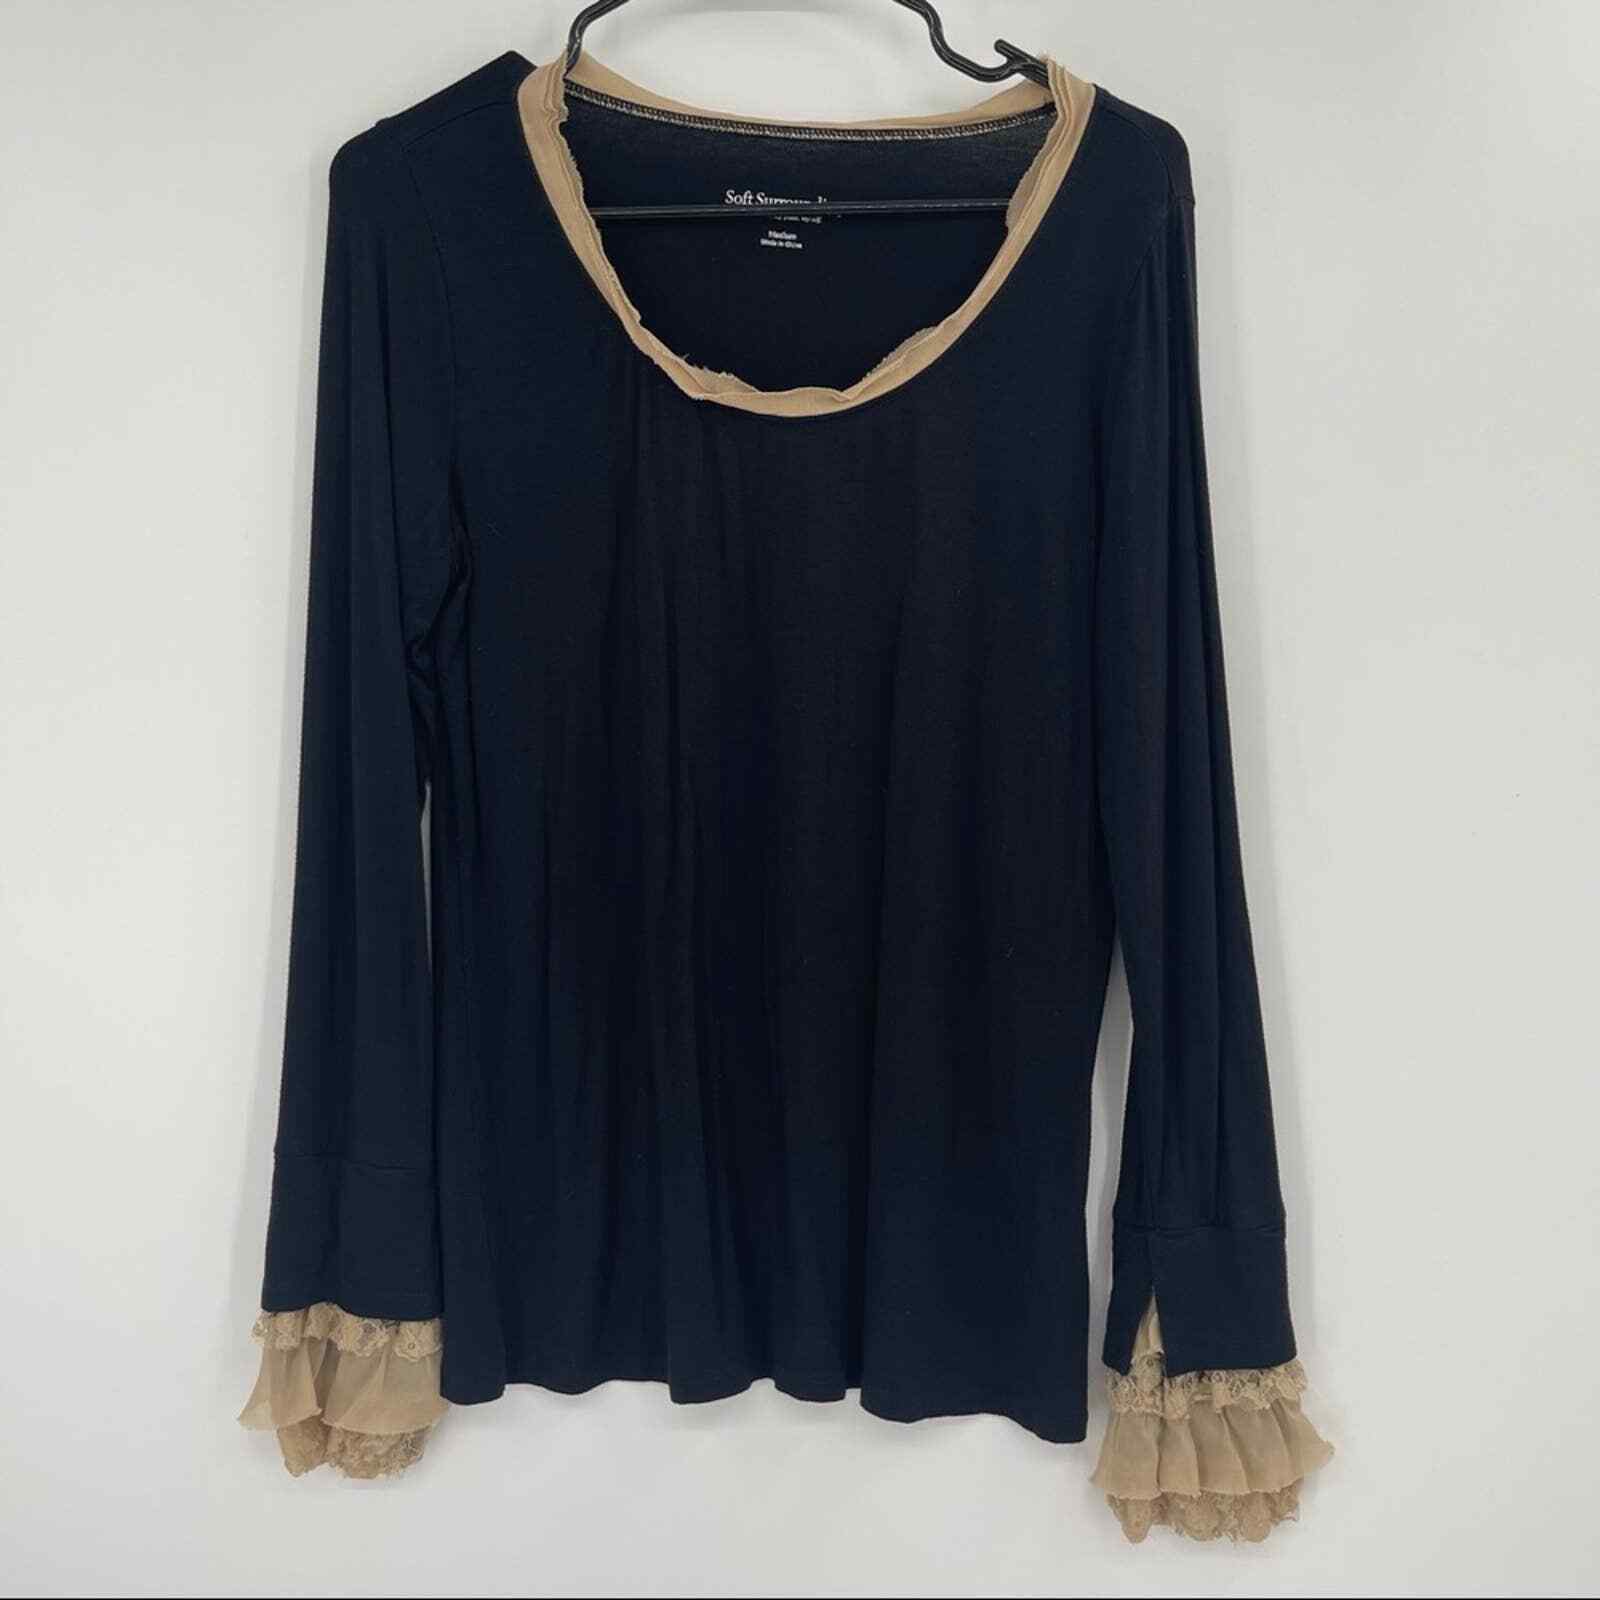 Soft Surroundings Lace Trimmed Sleeve Top - image 1